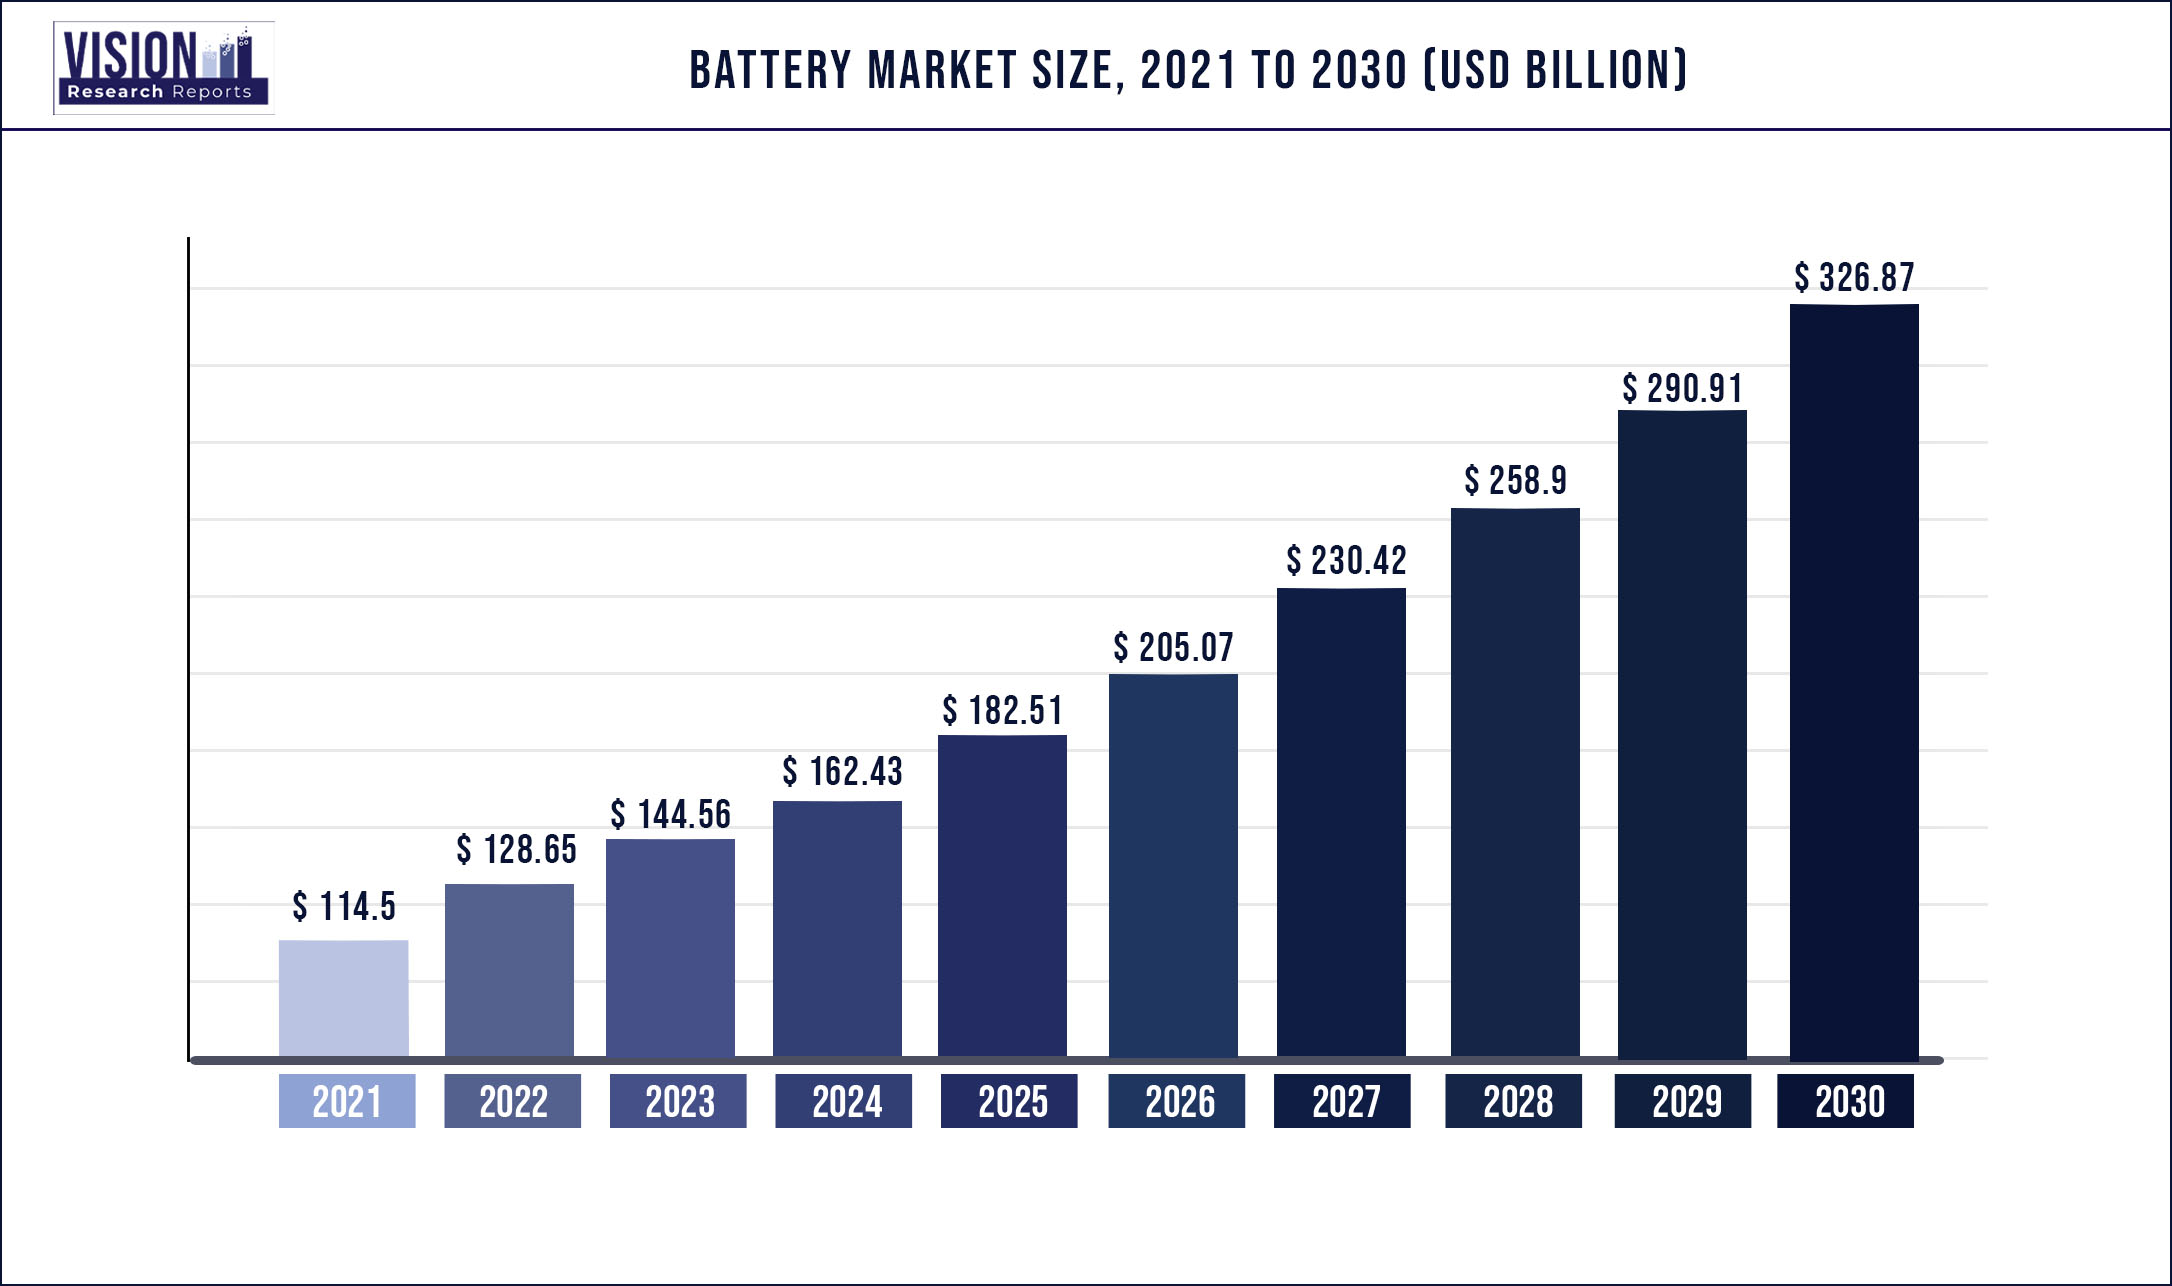 Battery Market Size 2021 to 2030